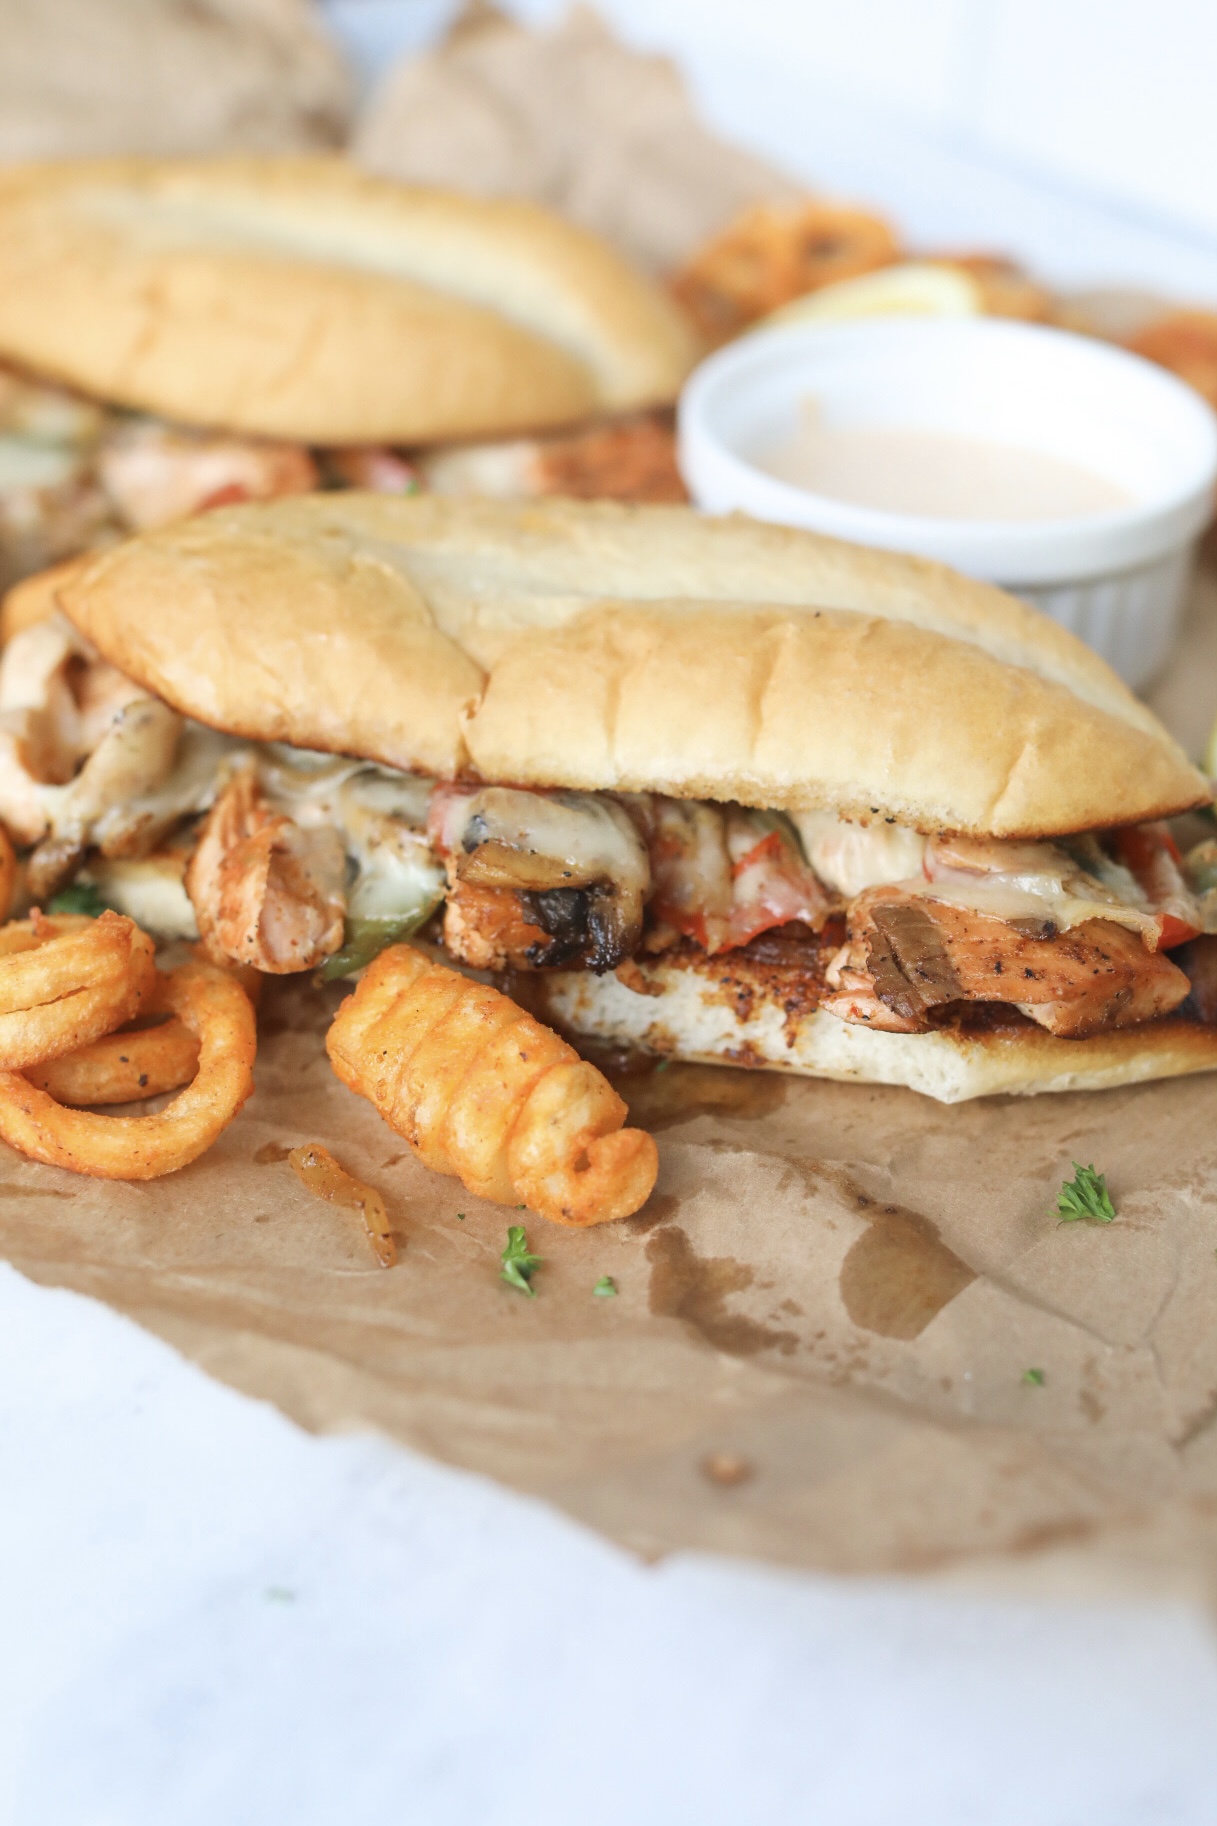 Salmon Cheesesteak with Remoulade Sauce in a white ramekin and curly fries for styling purpsoes.